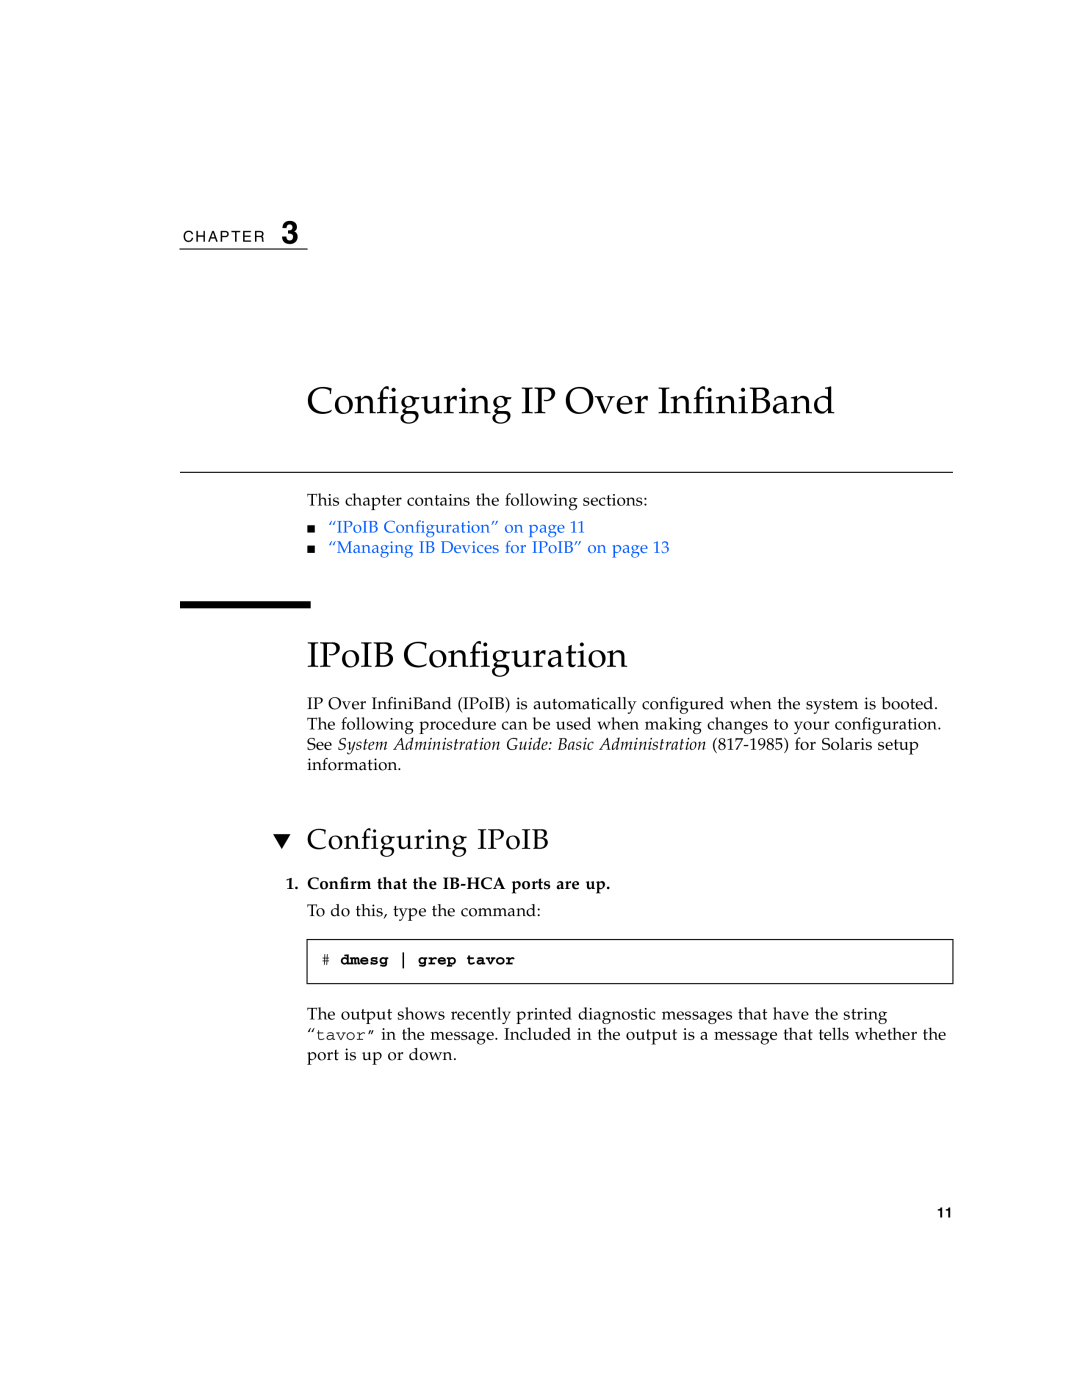 Sun Microsystems PCI manual Configuring IP Over InfiniBand, IPoIB Configuration, Configuring IPoIB 